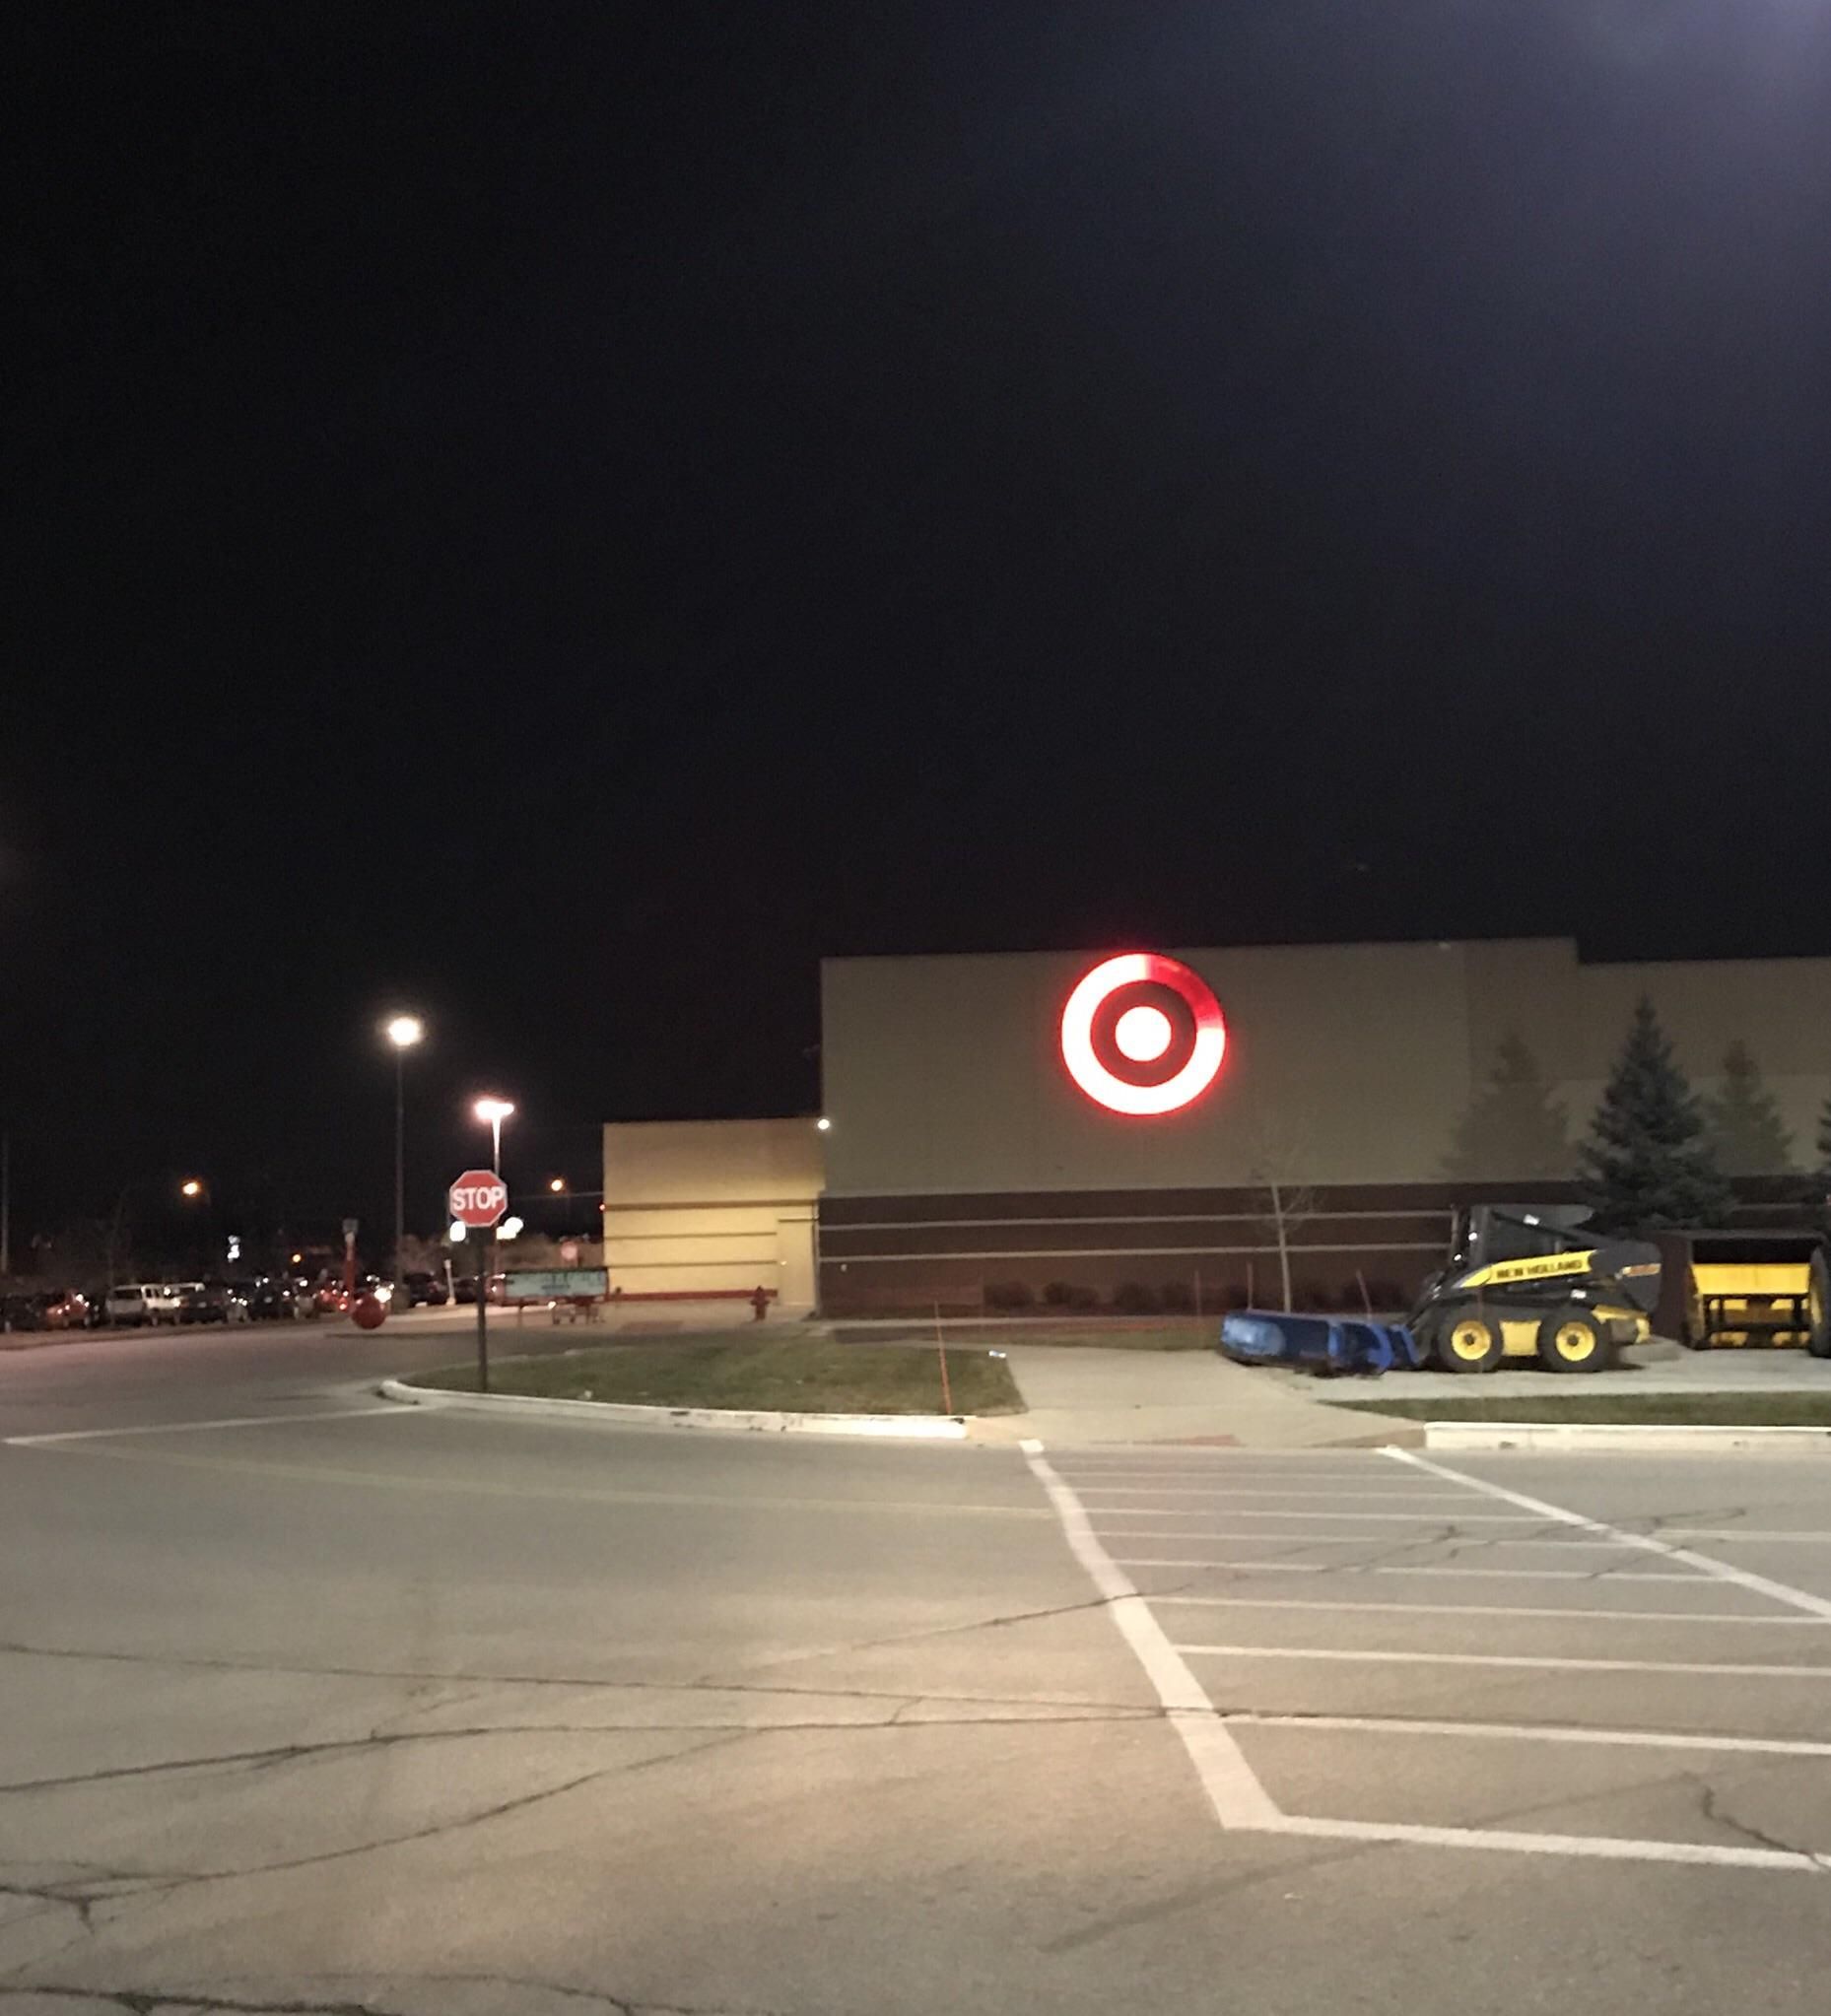 Local Target has the Red Ring of Death.